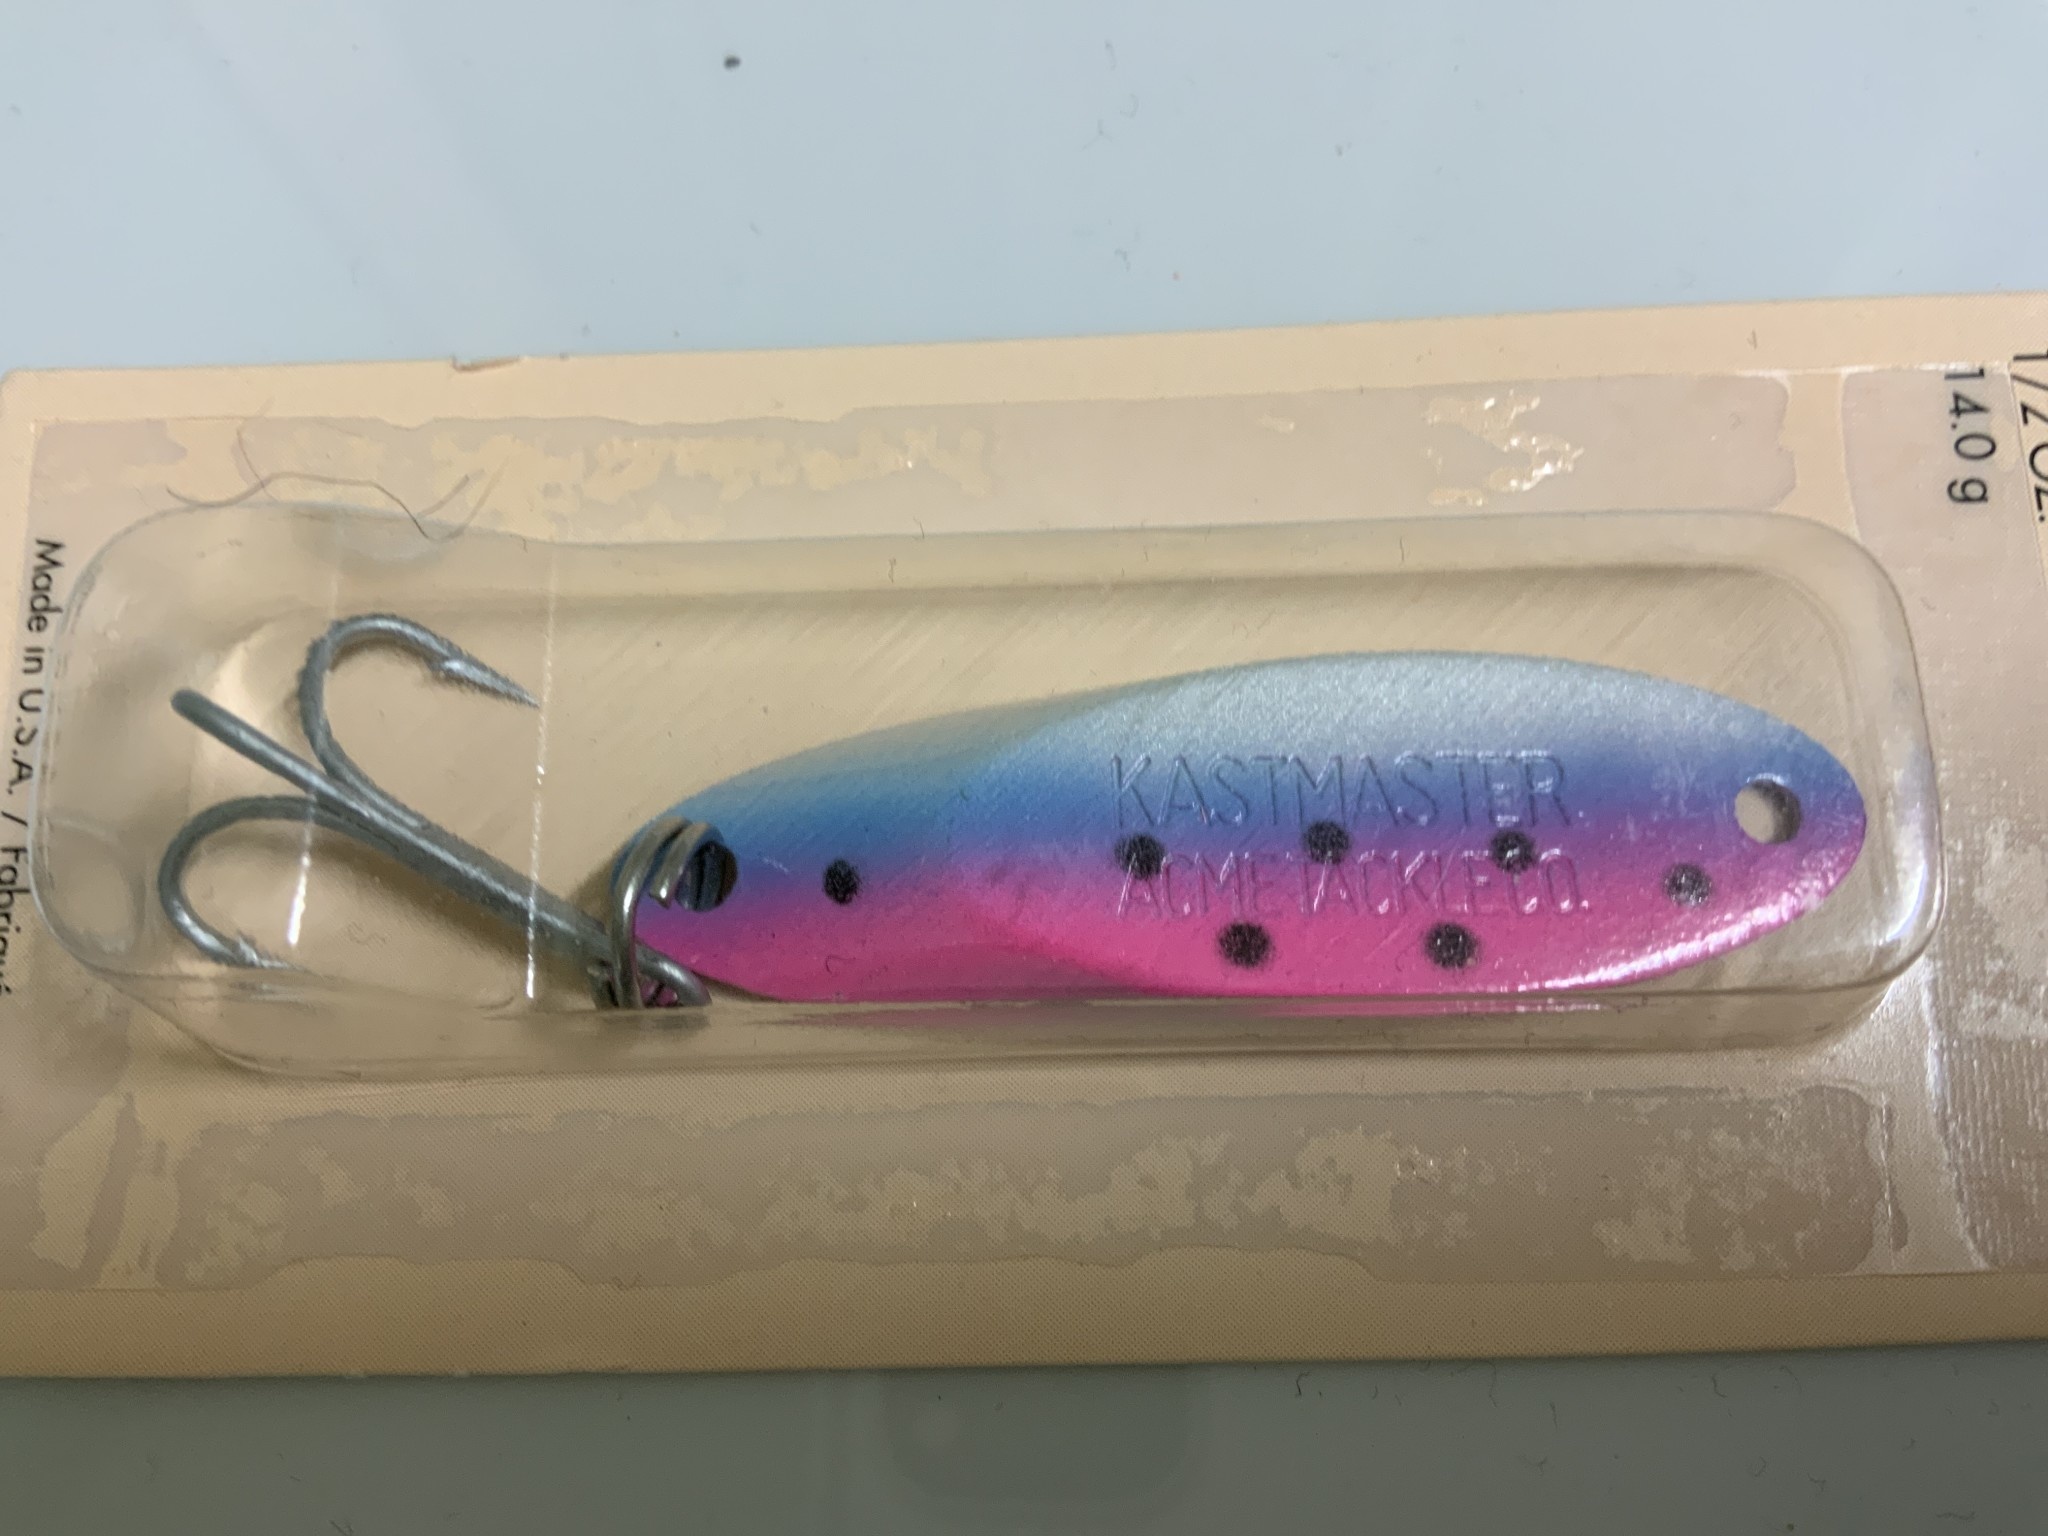 KASTMASTER - One of my favorites for trout & bass. [Details in comments] :  r/Fishing